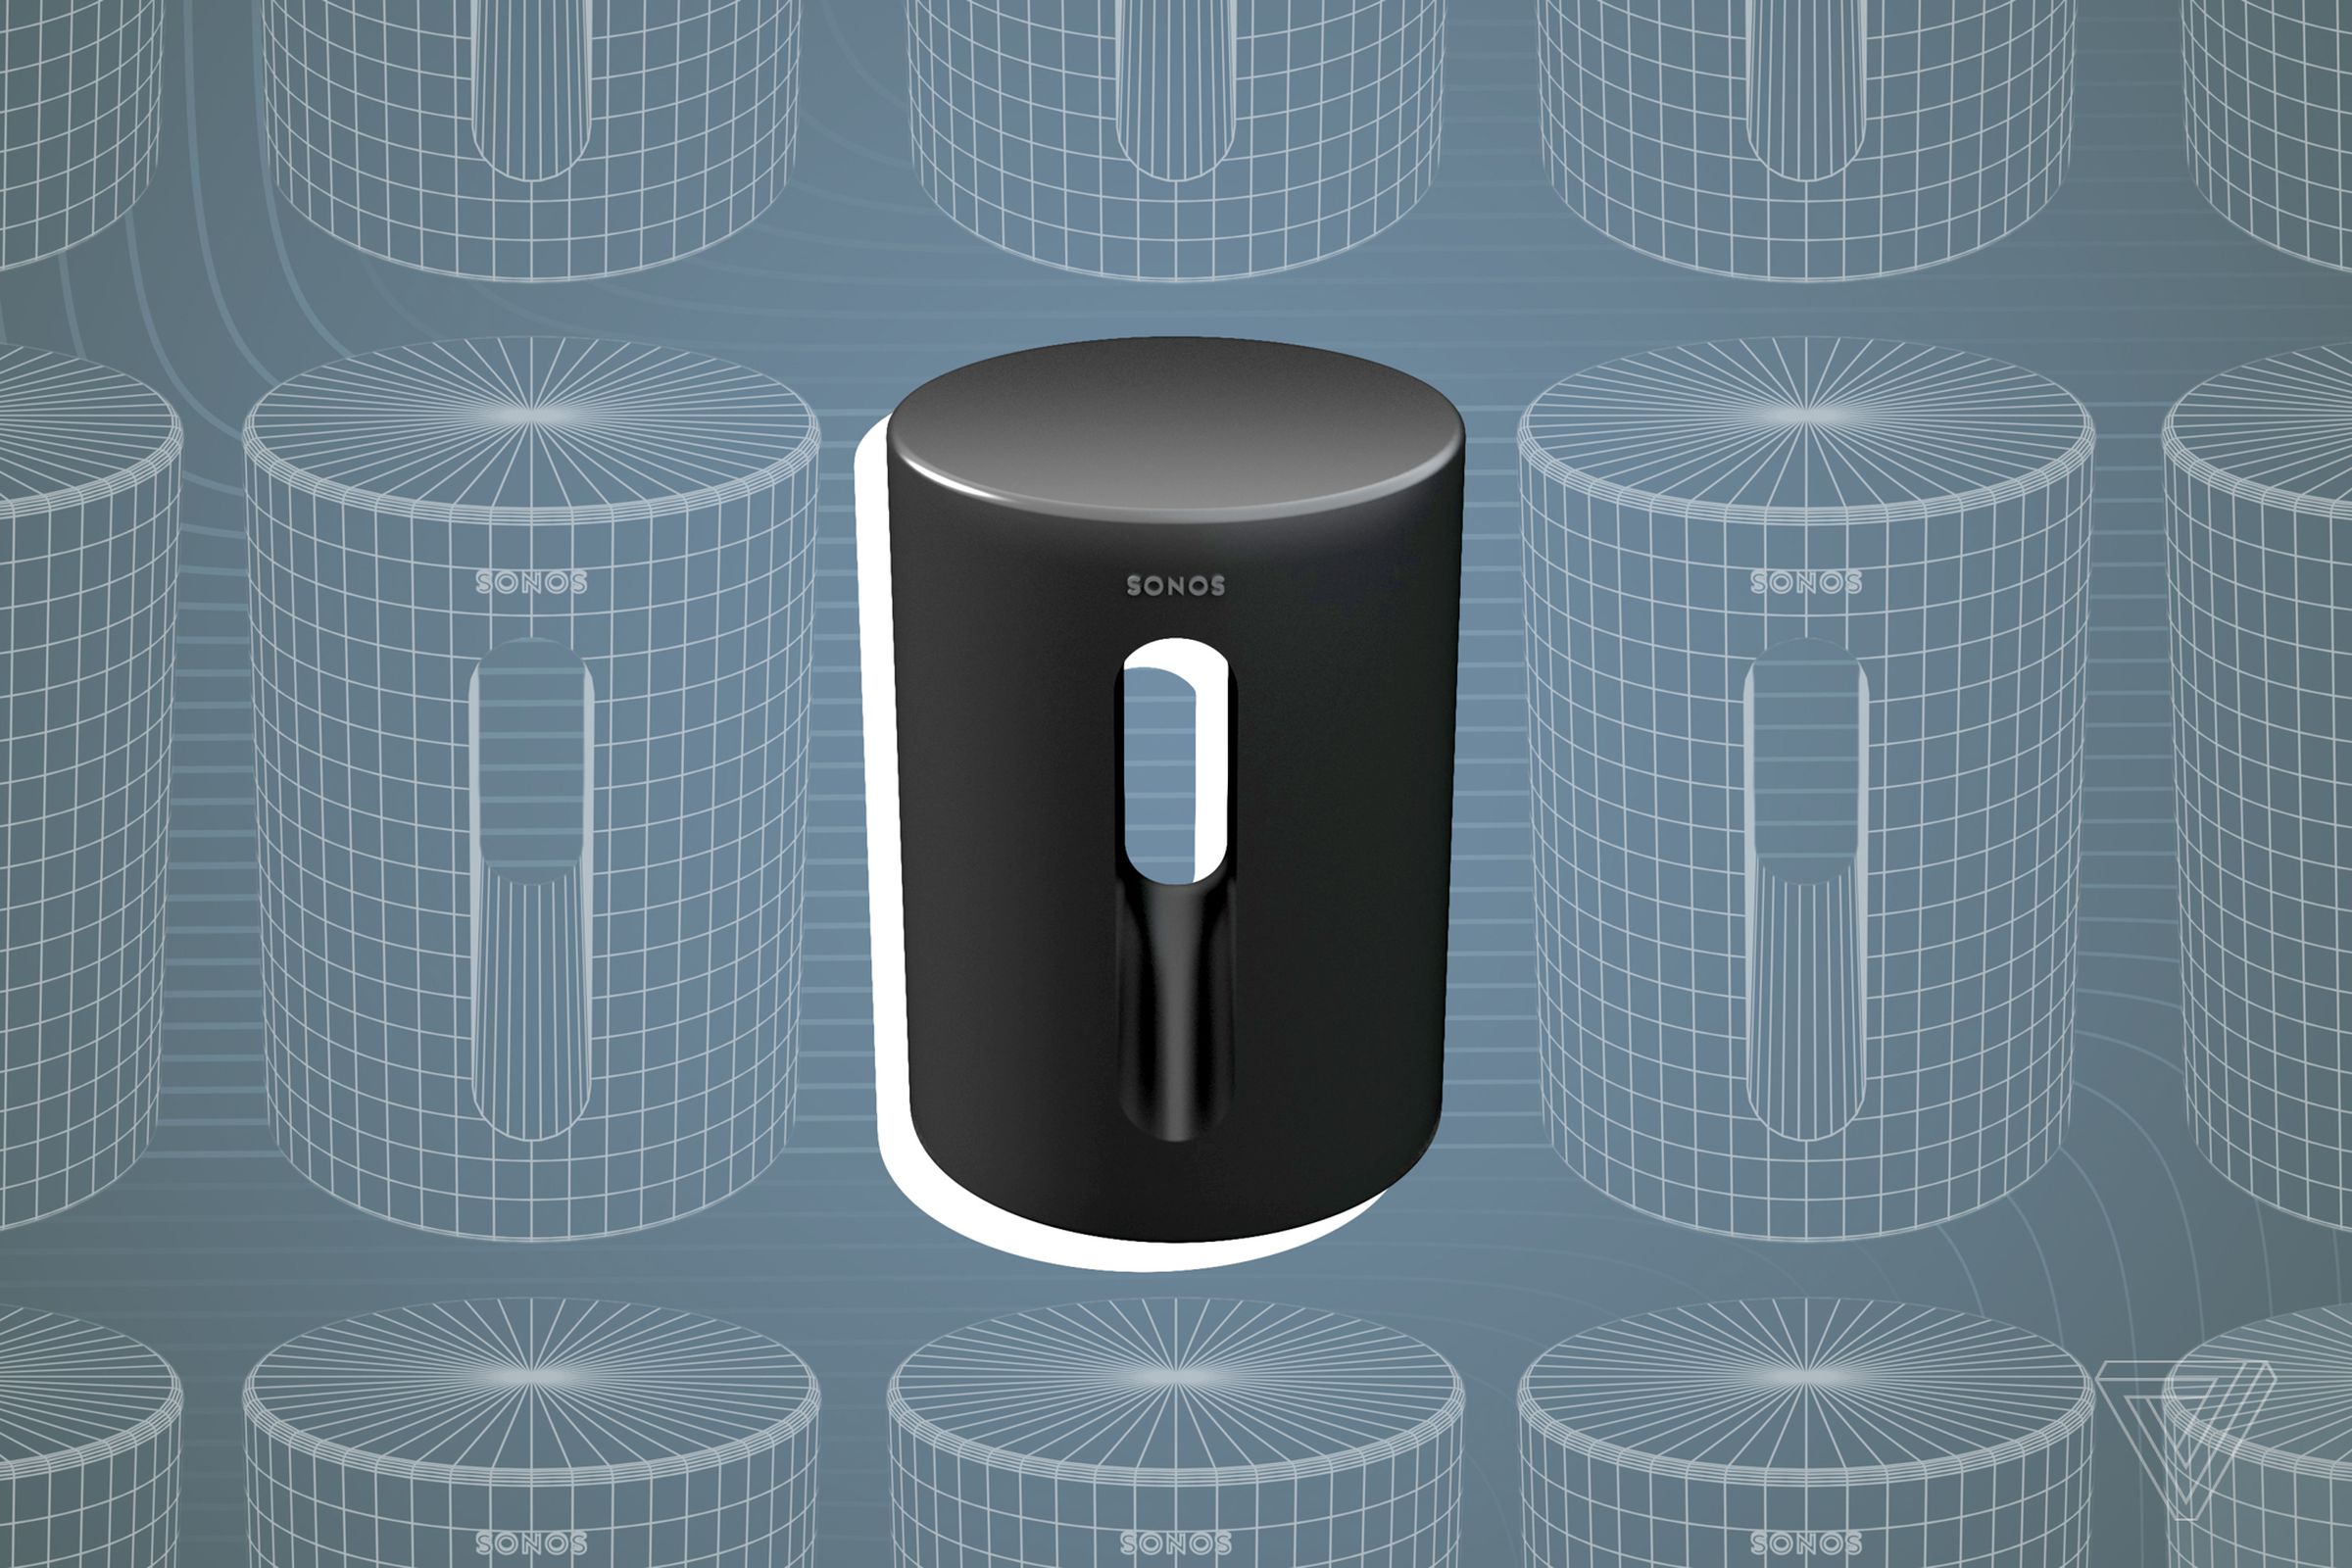 A 3D product rendering of the upcoming Sonos Sub Mini, as created by The Verge.